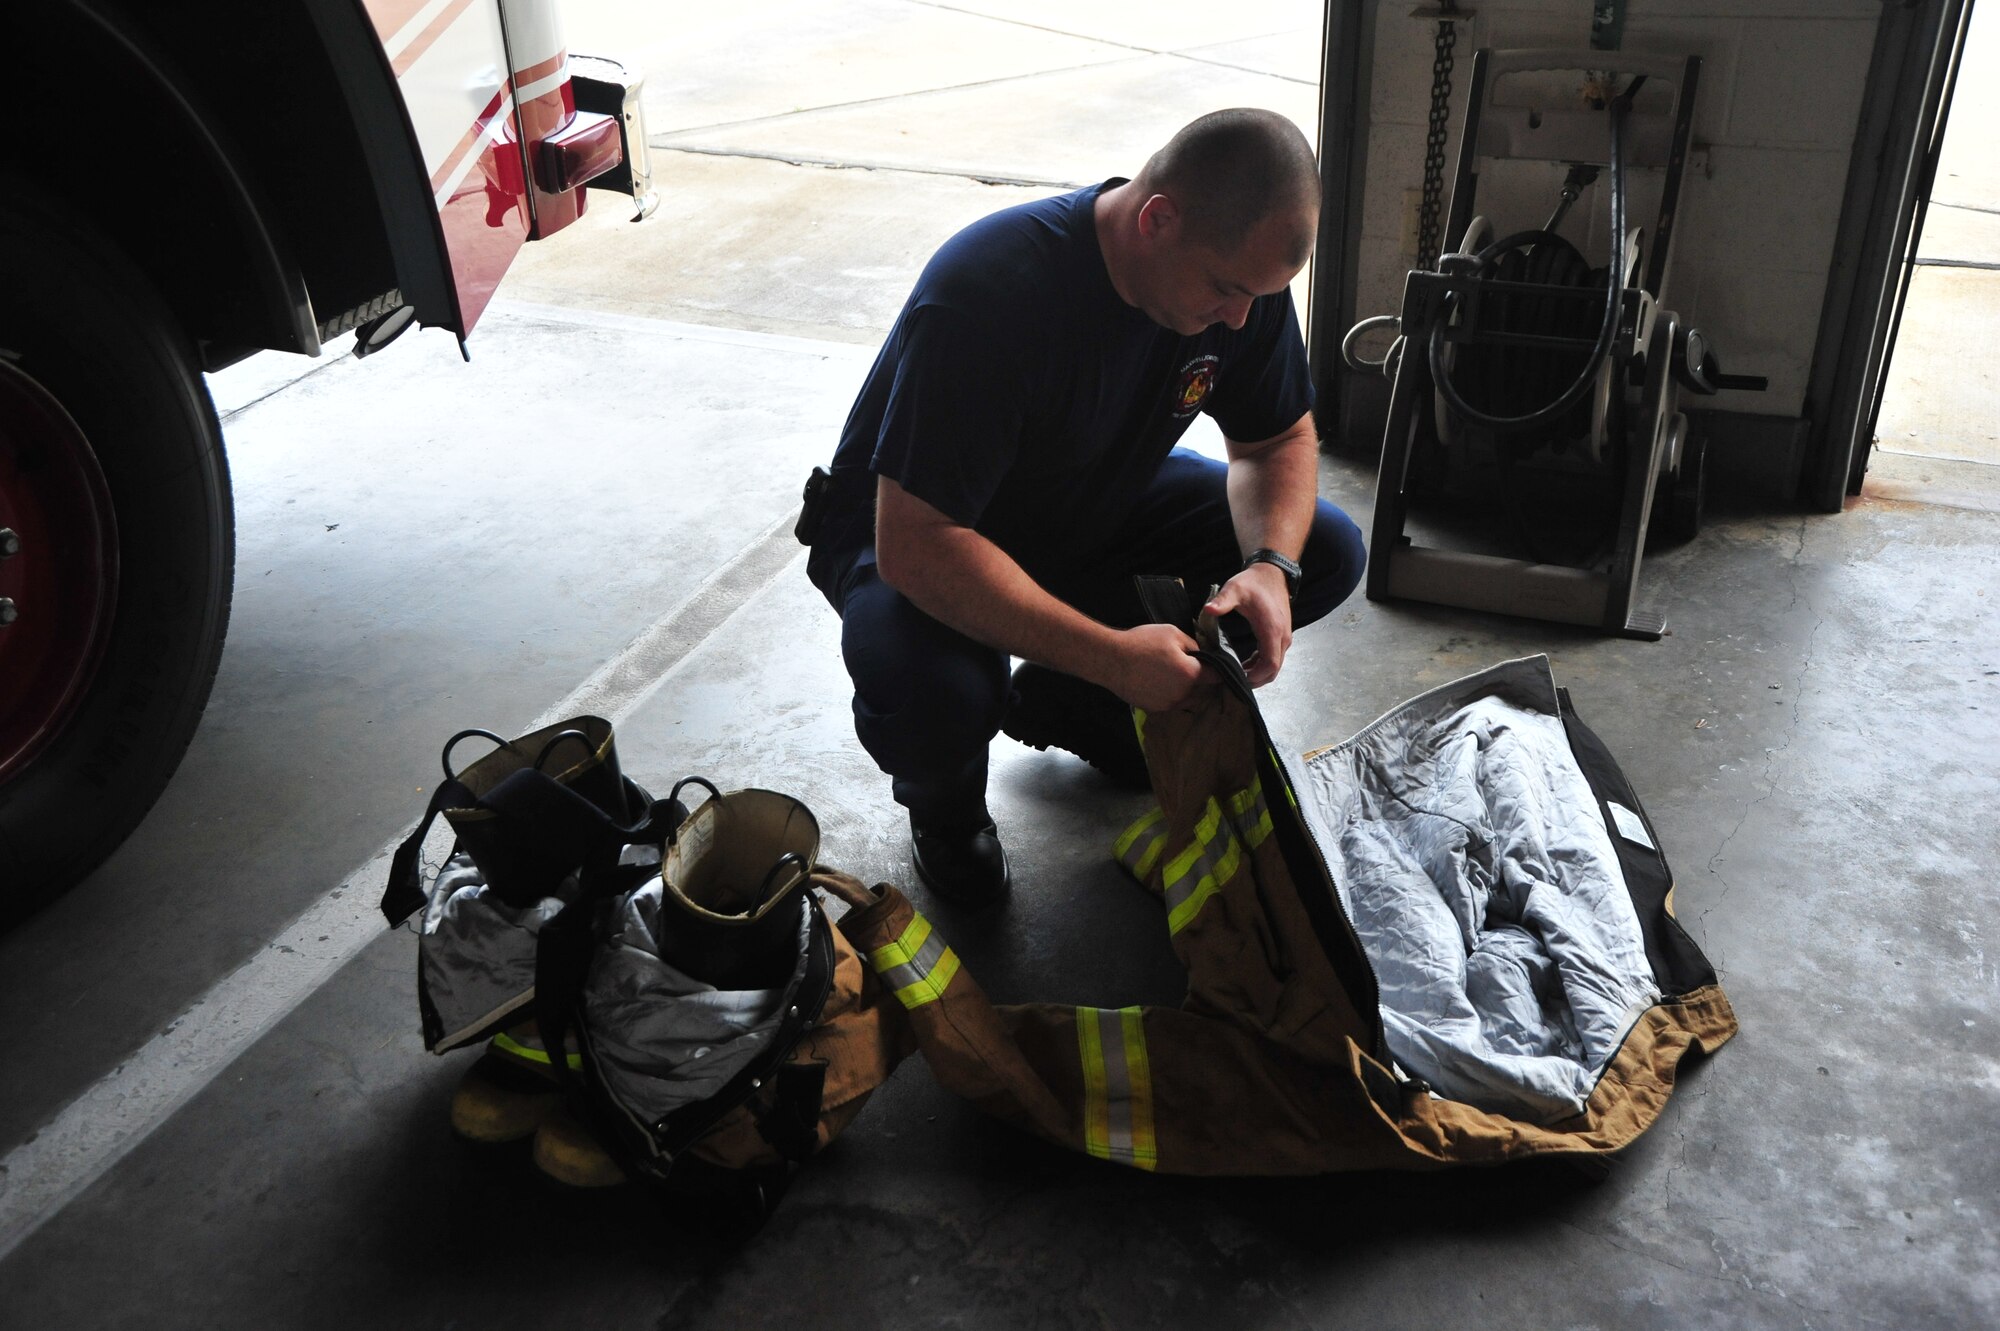 Paul Nowak, firefighter at Maxwell Air Force Base, checks his firefighter suit before a training exercise on April 19. Fire protection suits must be in working condition to be able to protect firemen in dangerous situations. (Air Force photo by Airman 1st Class William Blankenship)